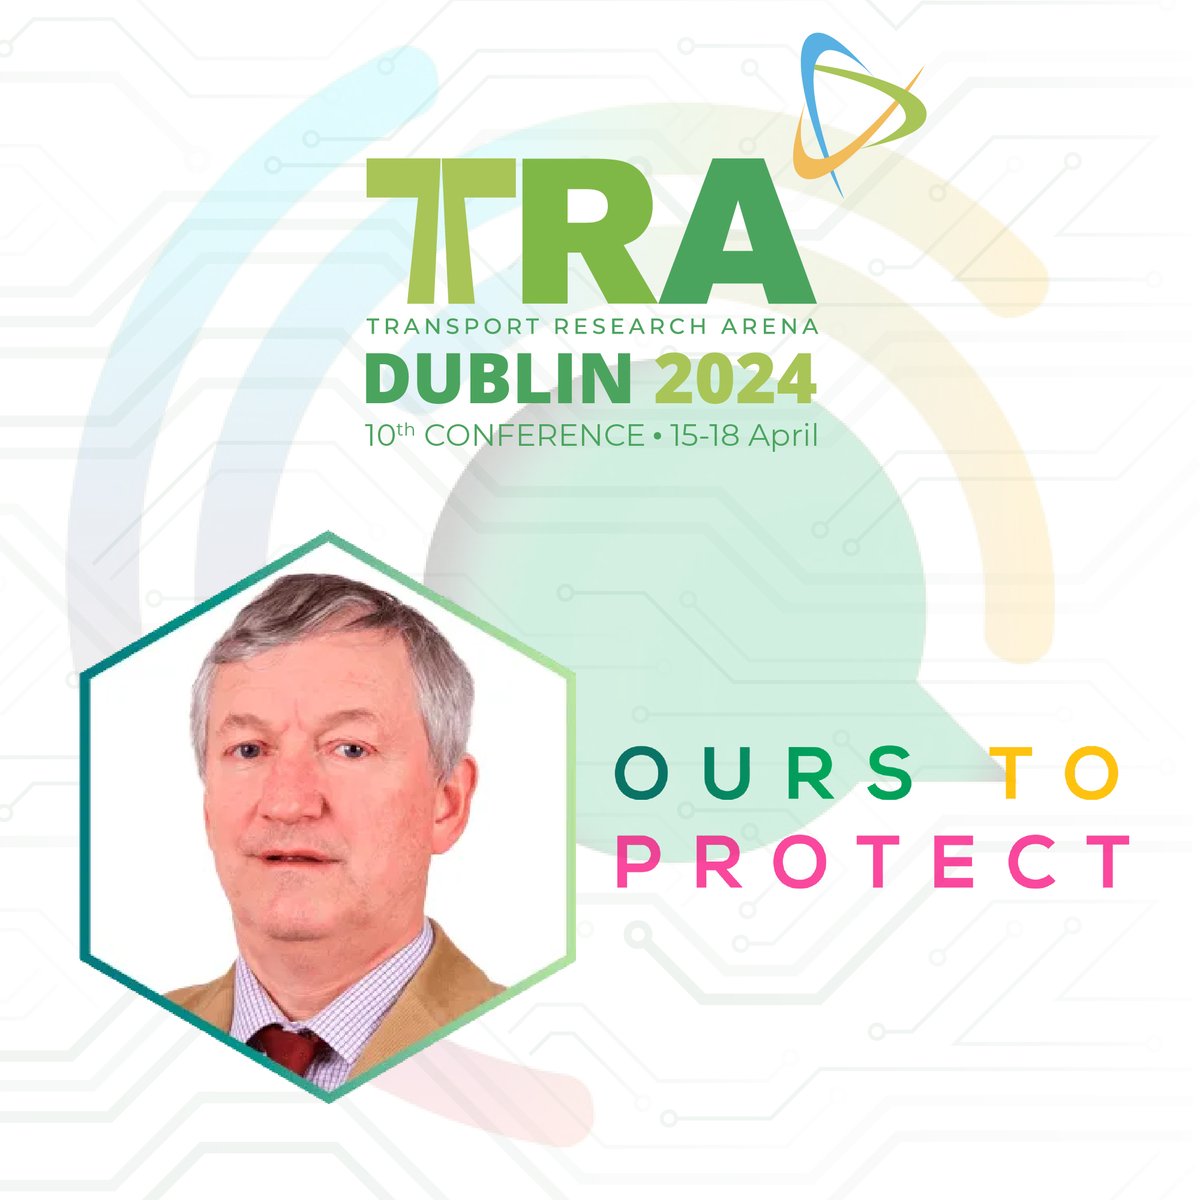 Our TRA 2024 Director Albert Daly joined Carol Dooley on the latest episode of Ours to Protect, a special podcast tackling climate change through impactful storytelling. TRA's key focus is advancing sustainable & inclusive mobility You can listen here: loom.ly/GyVaZxE